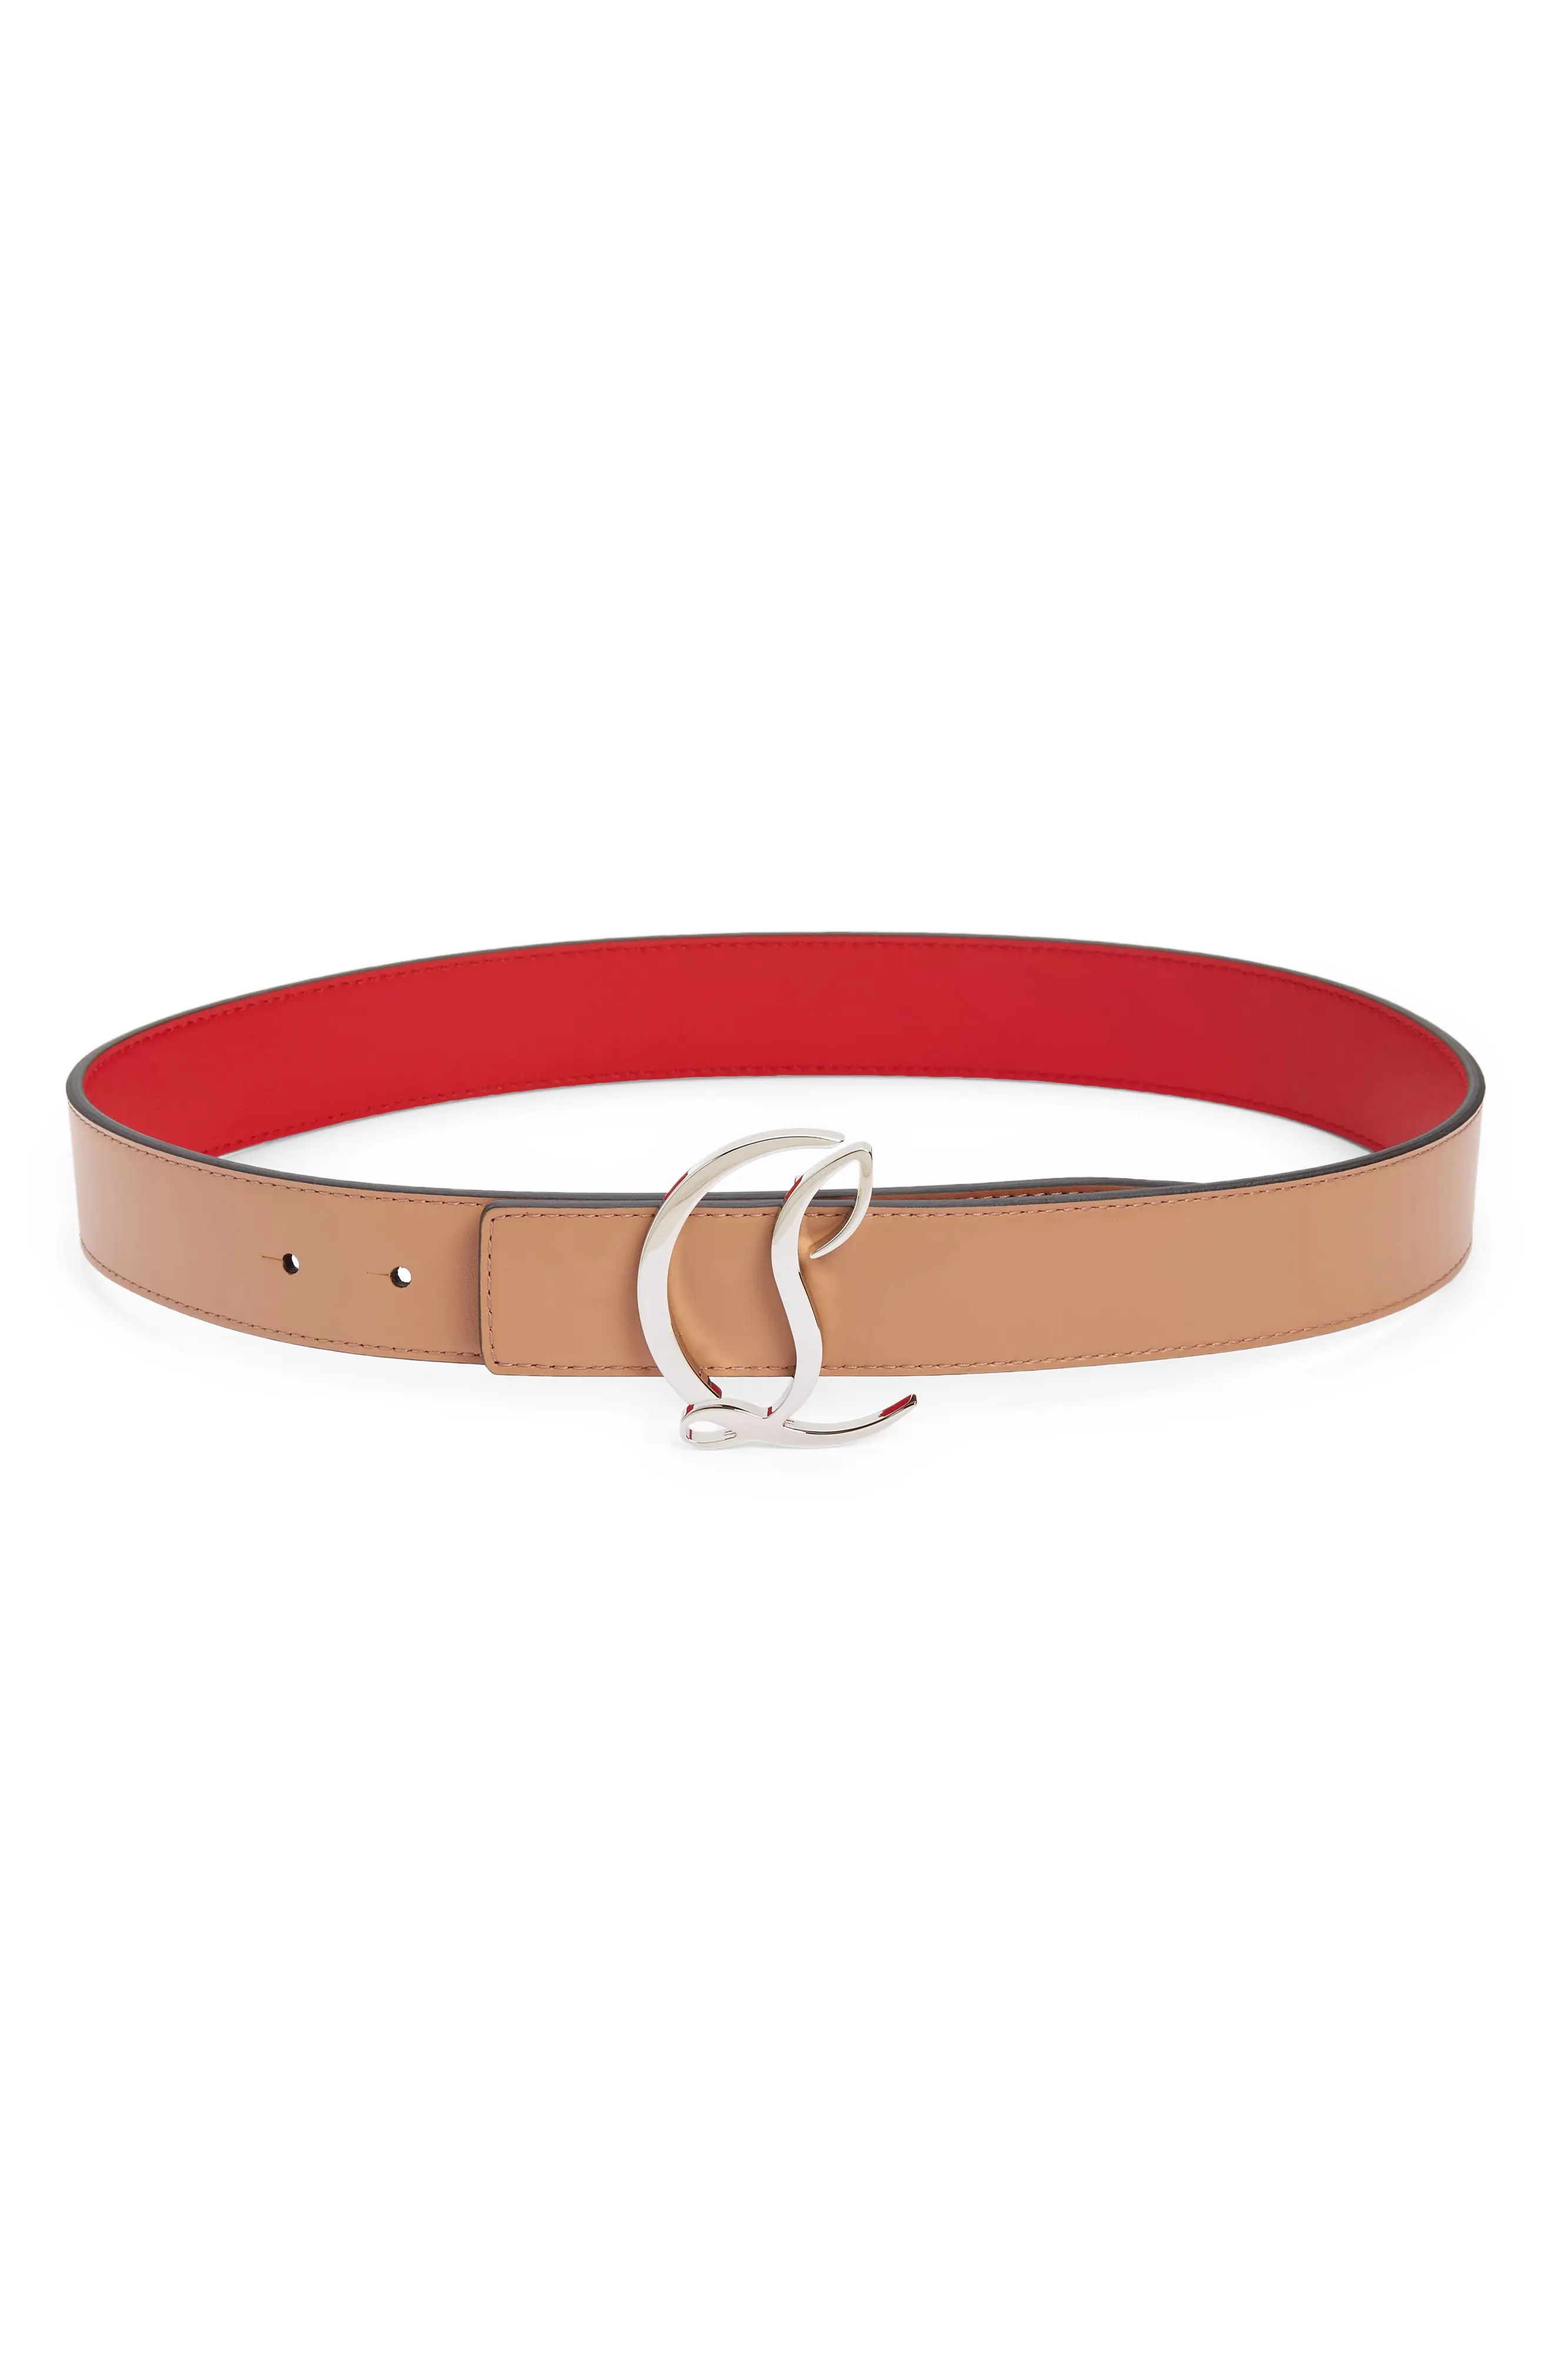 Christian Louboutin Logo Buckle Leather Belt, Size 80 in Nude/Silver at Nordstrom | Nordstrom